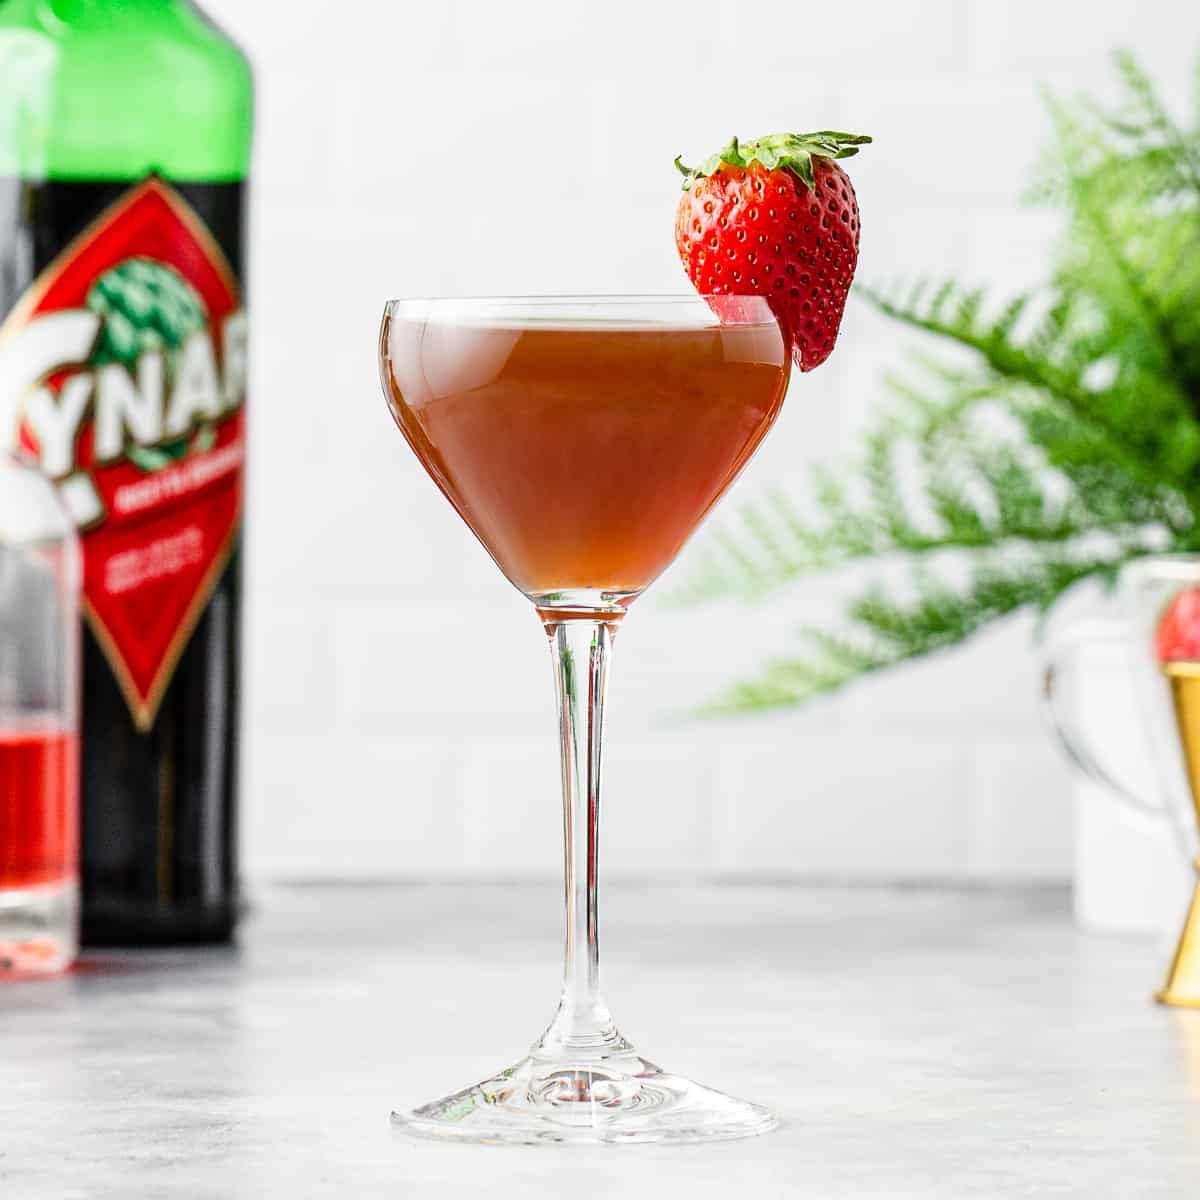 Strawberry Tequila Cocktail with Cynar Liqueur